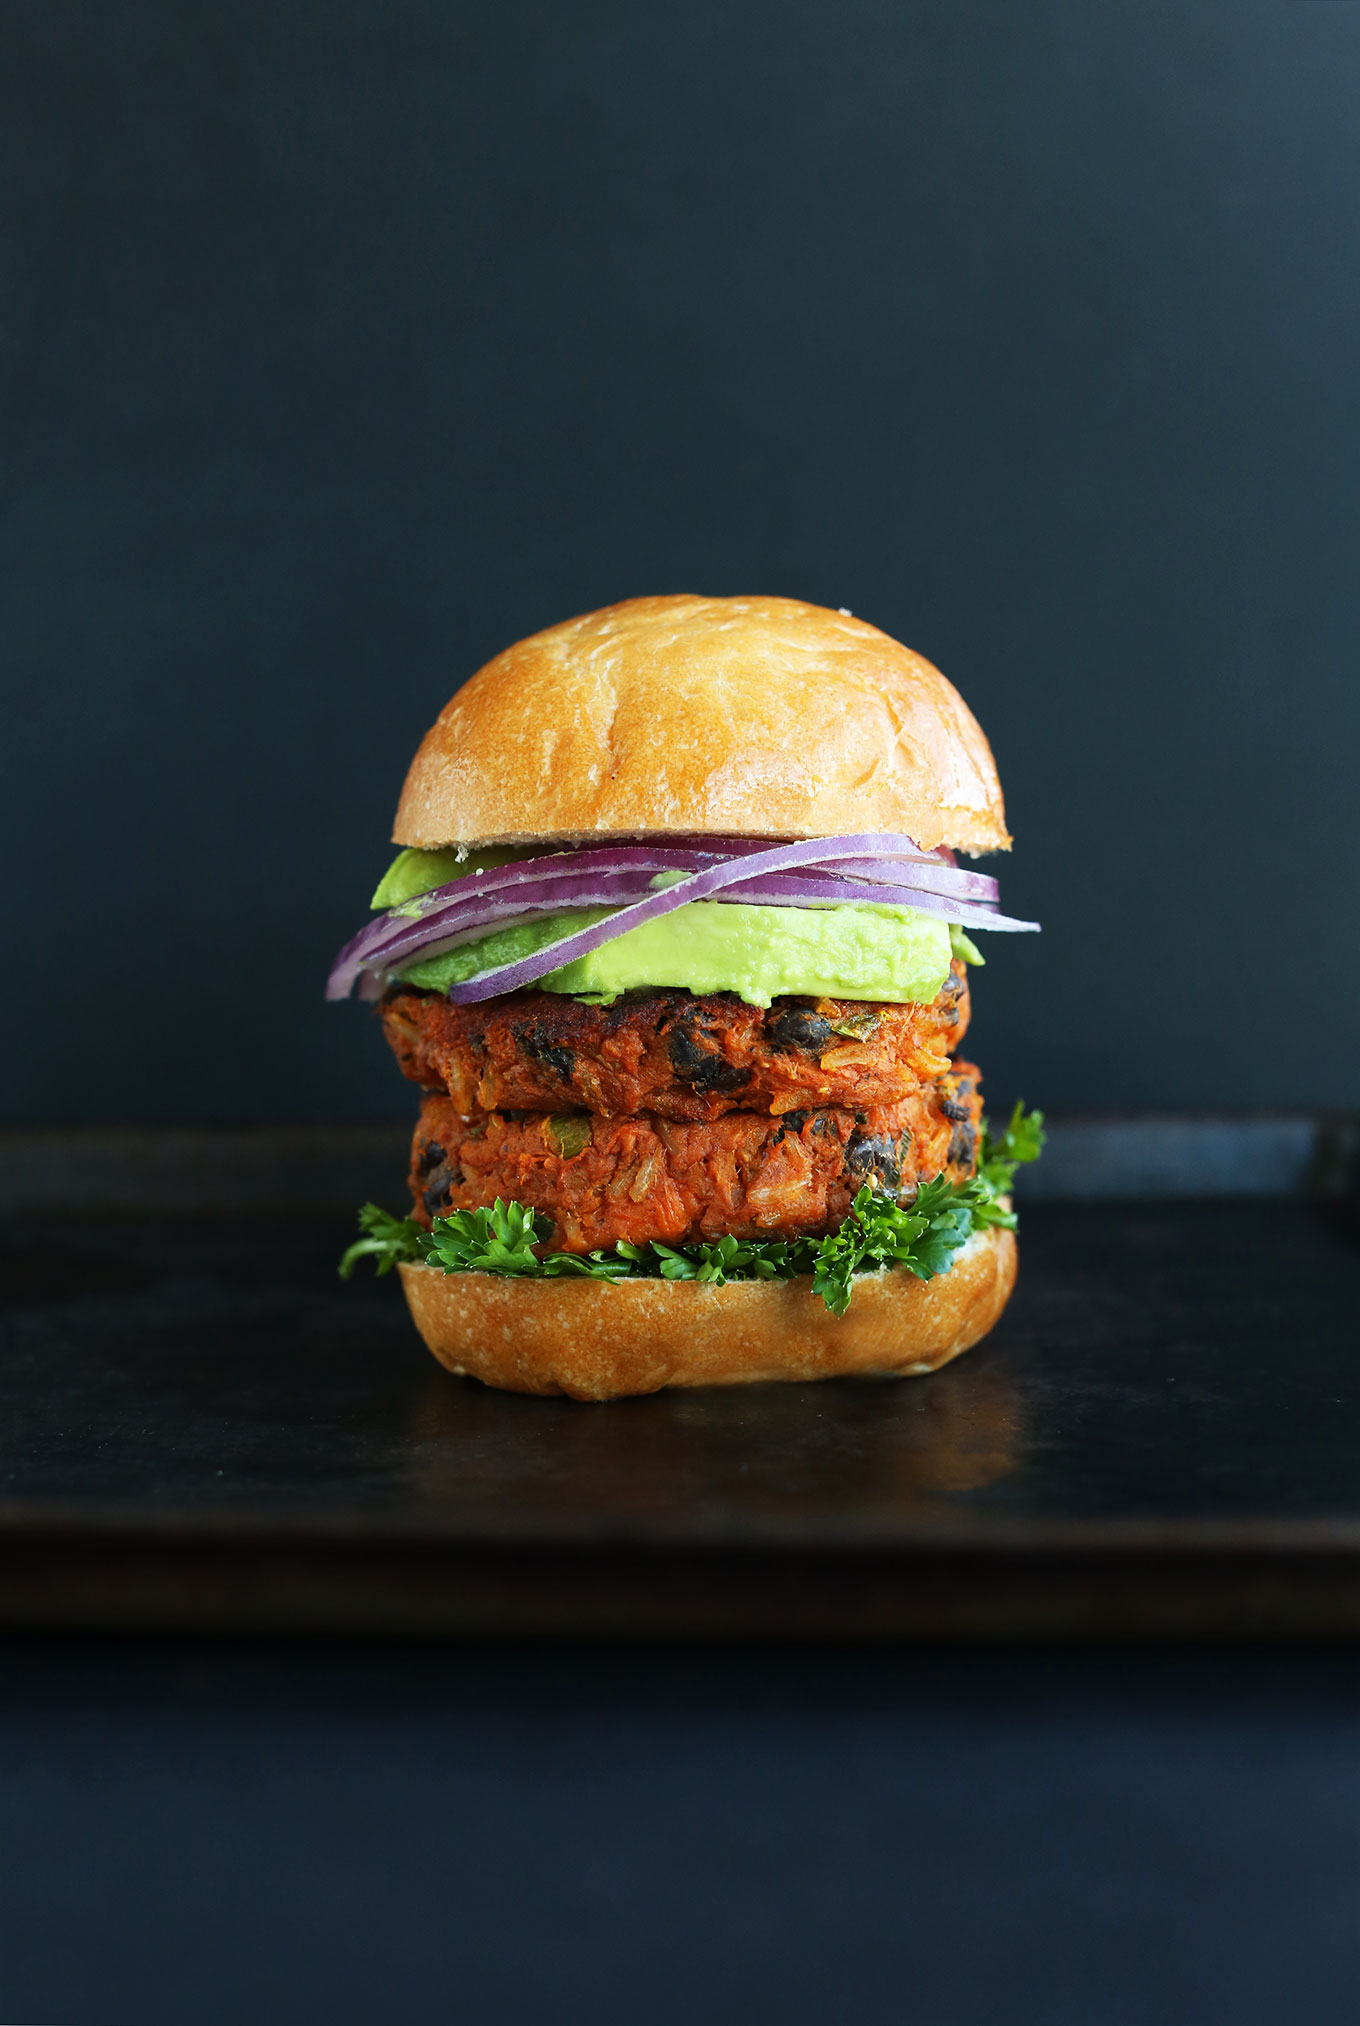 Sweet Potato Black Bean Burgers in a bun with parsley, avocado, and red onion on a bun